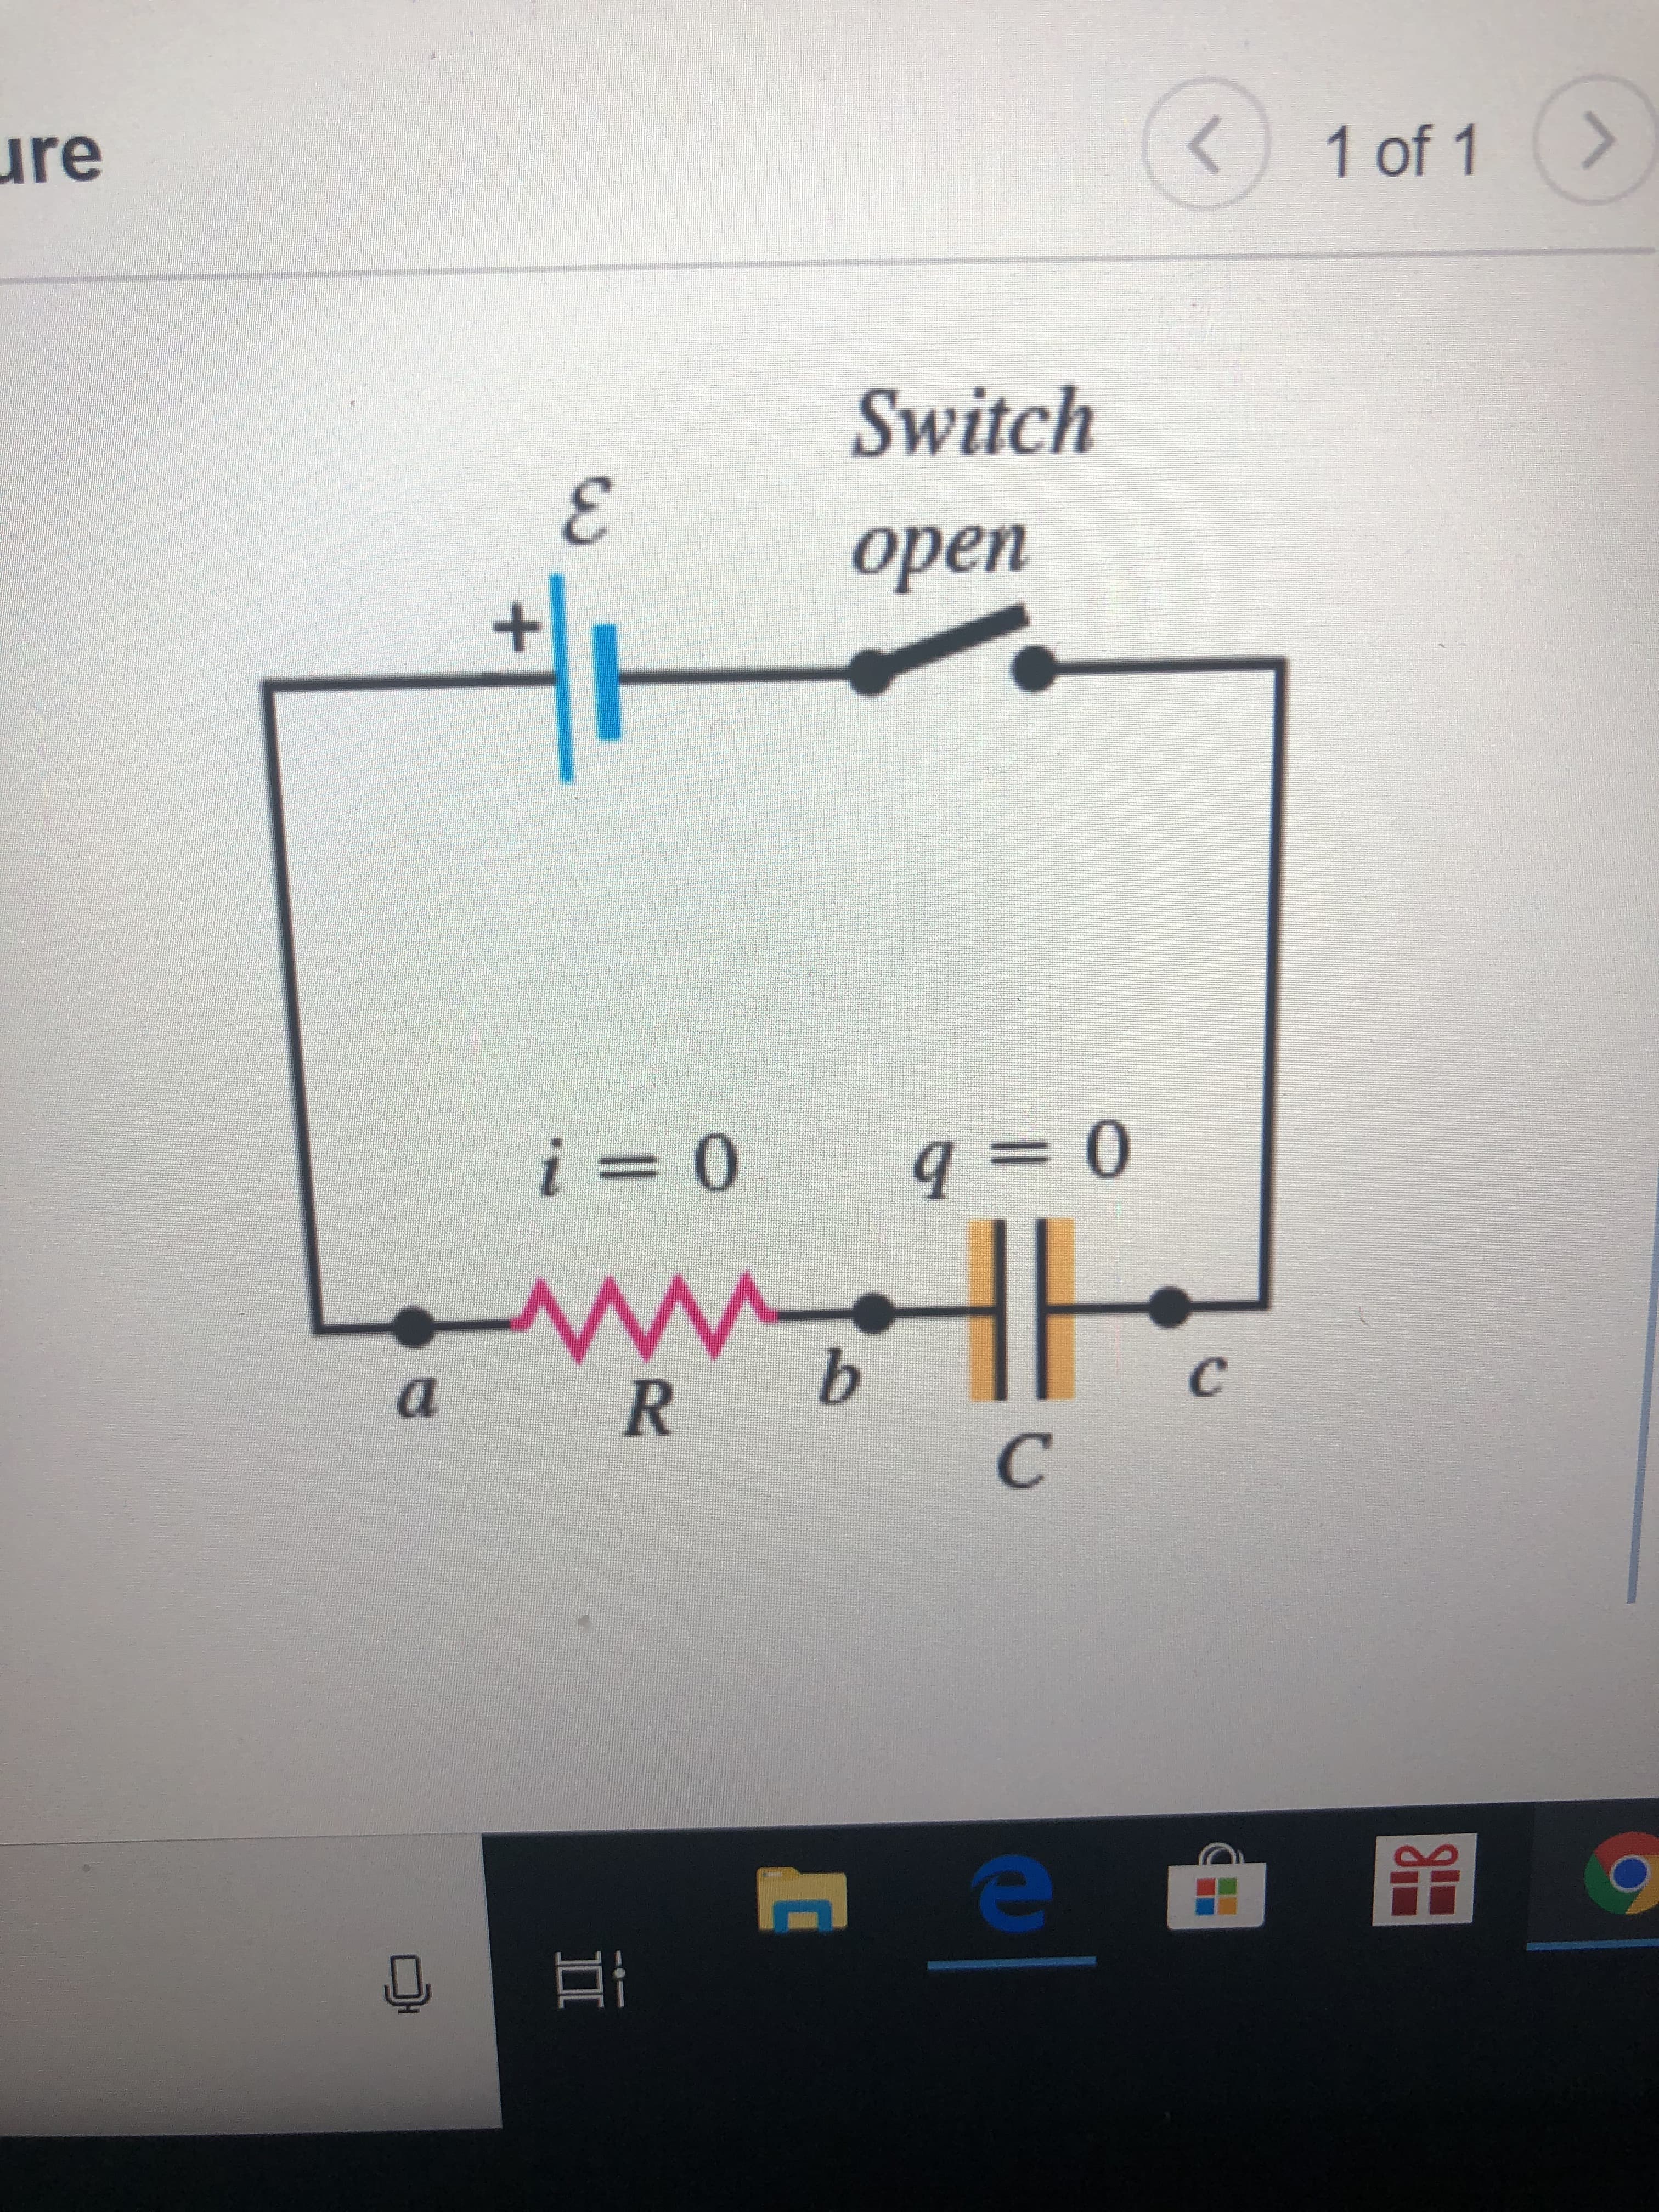 ure
1 of 1
Switch
open
i =
0.
HH
b.
Cc
a
3.
